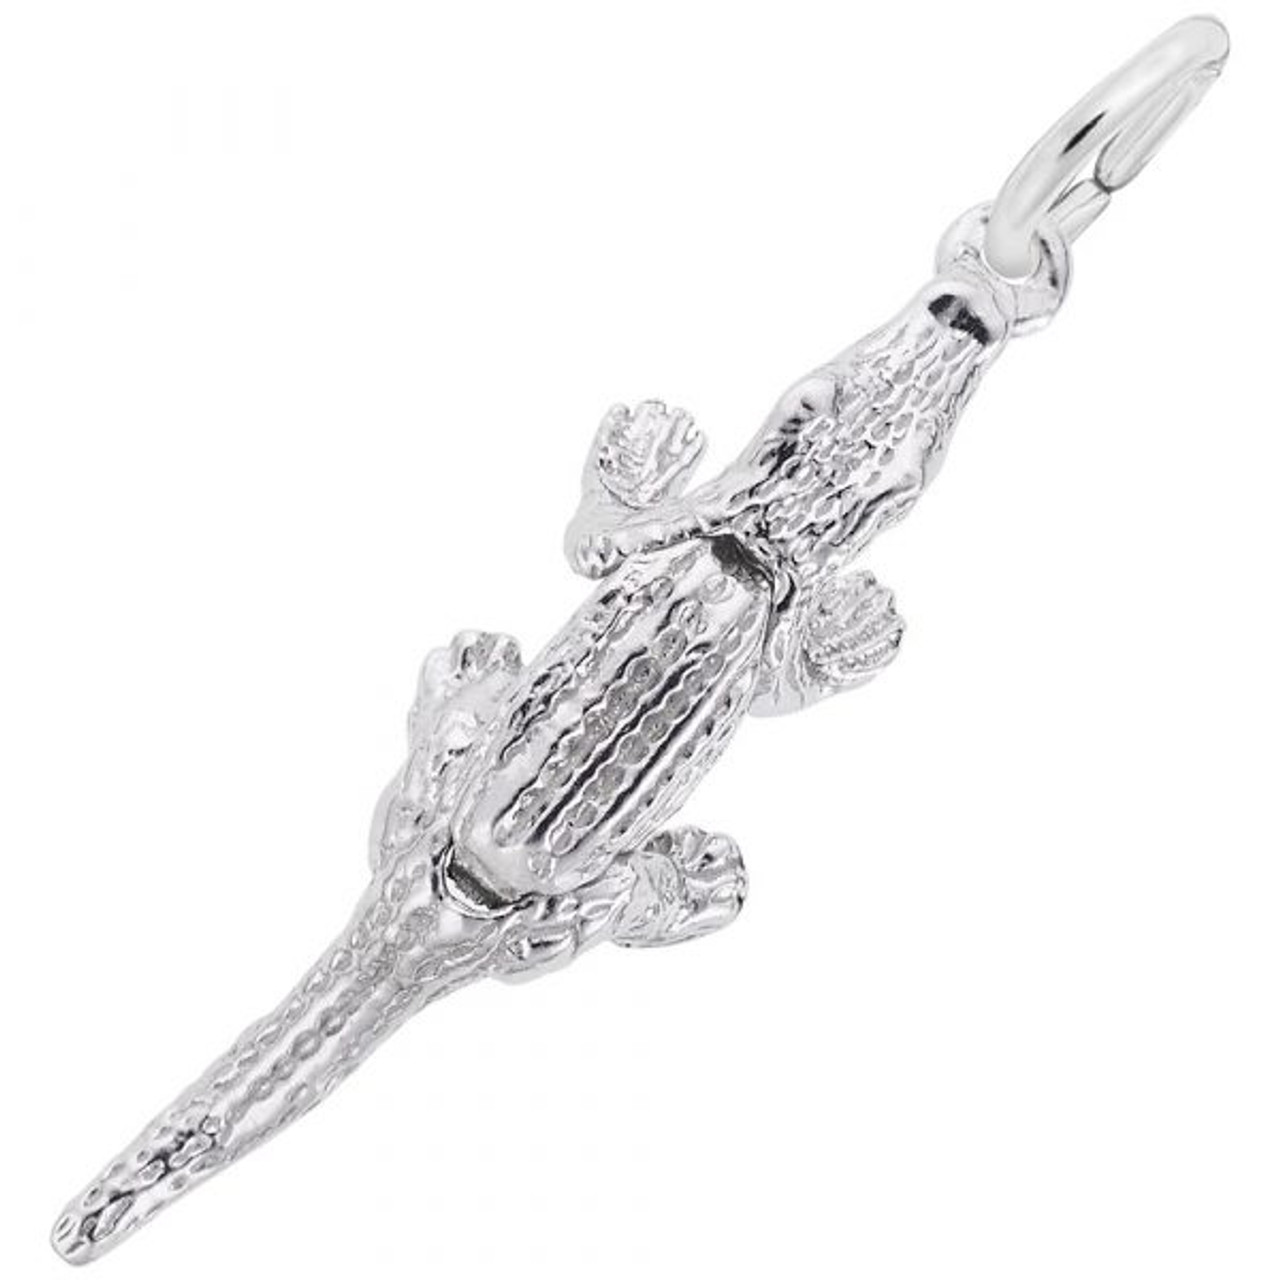 Large Alligator Charm - Sterling Silver and 14k White Gold